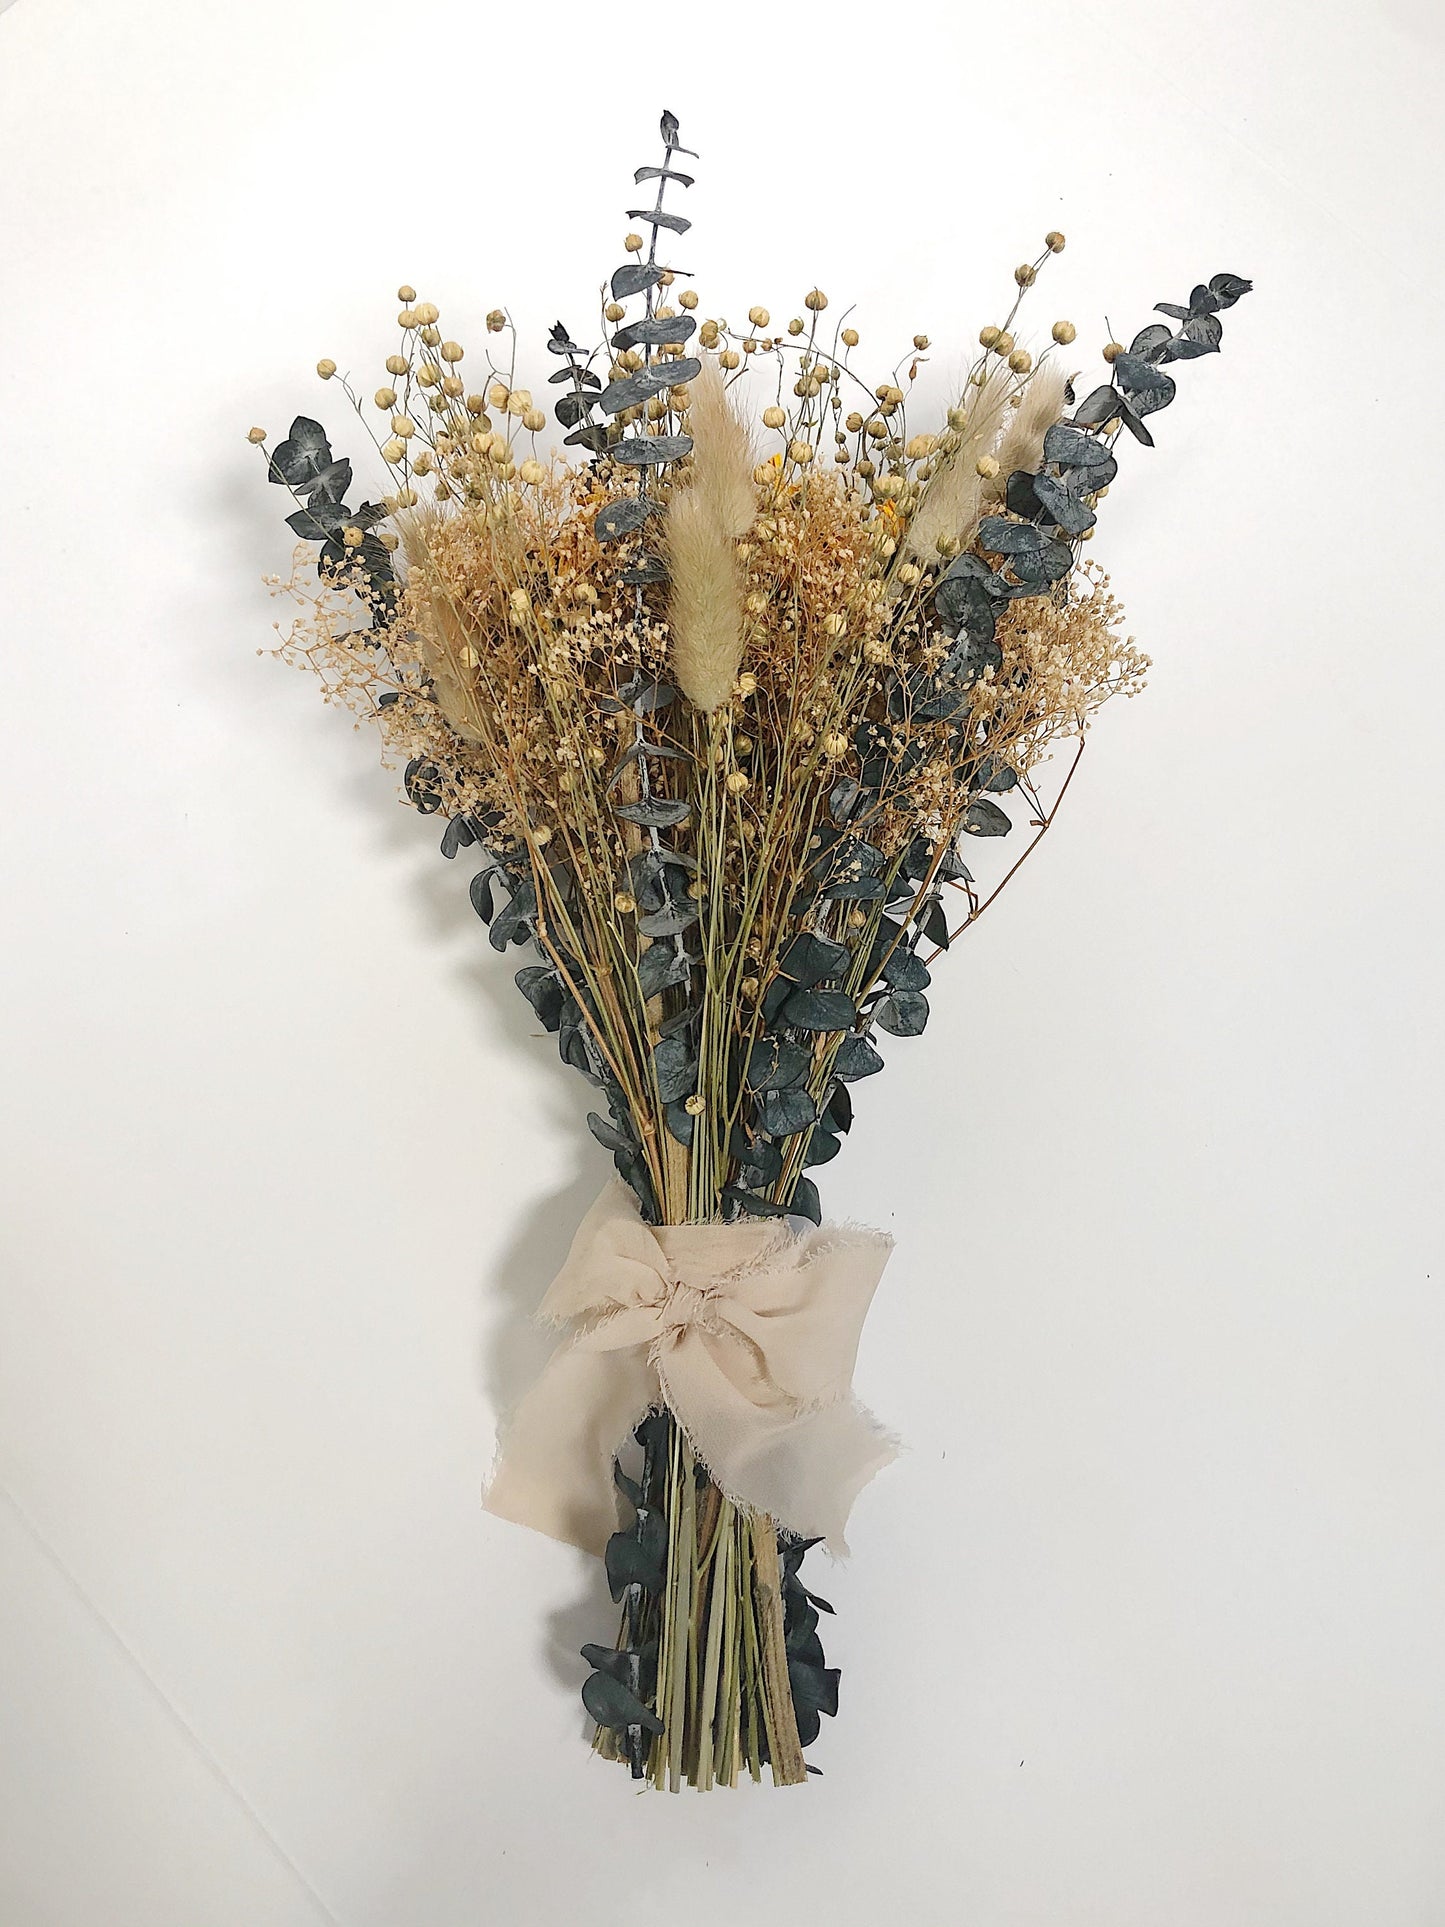 Sunflower Floral Bouquet, Dried Flowers, Preserved Floral, Yellow, Wildflowers, Mini Gyp, Home Decor, Wedding, Bunny Tails, Eucalyptus